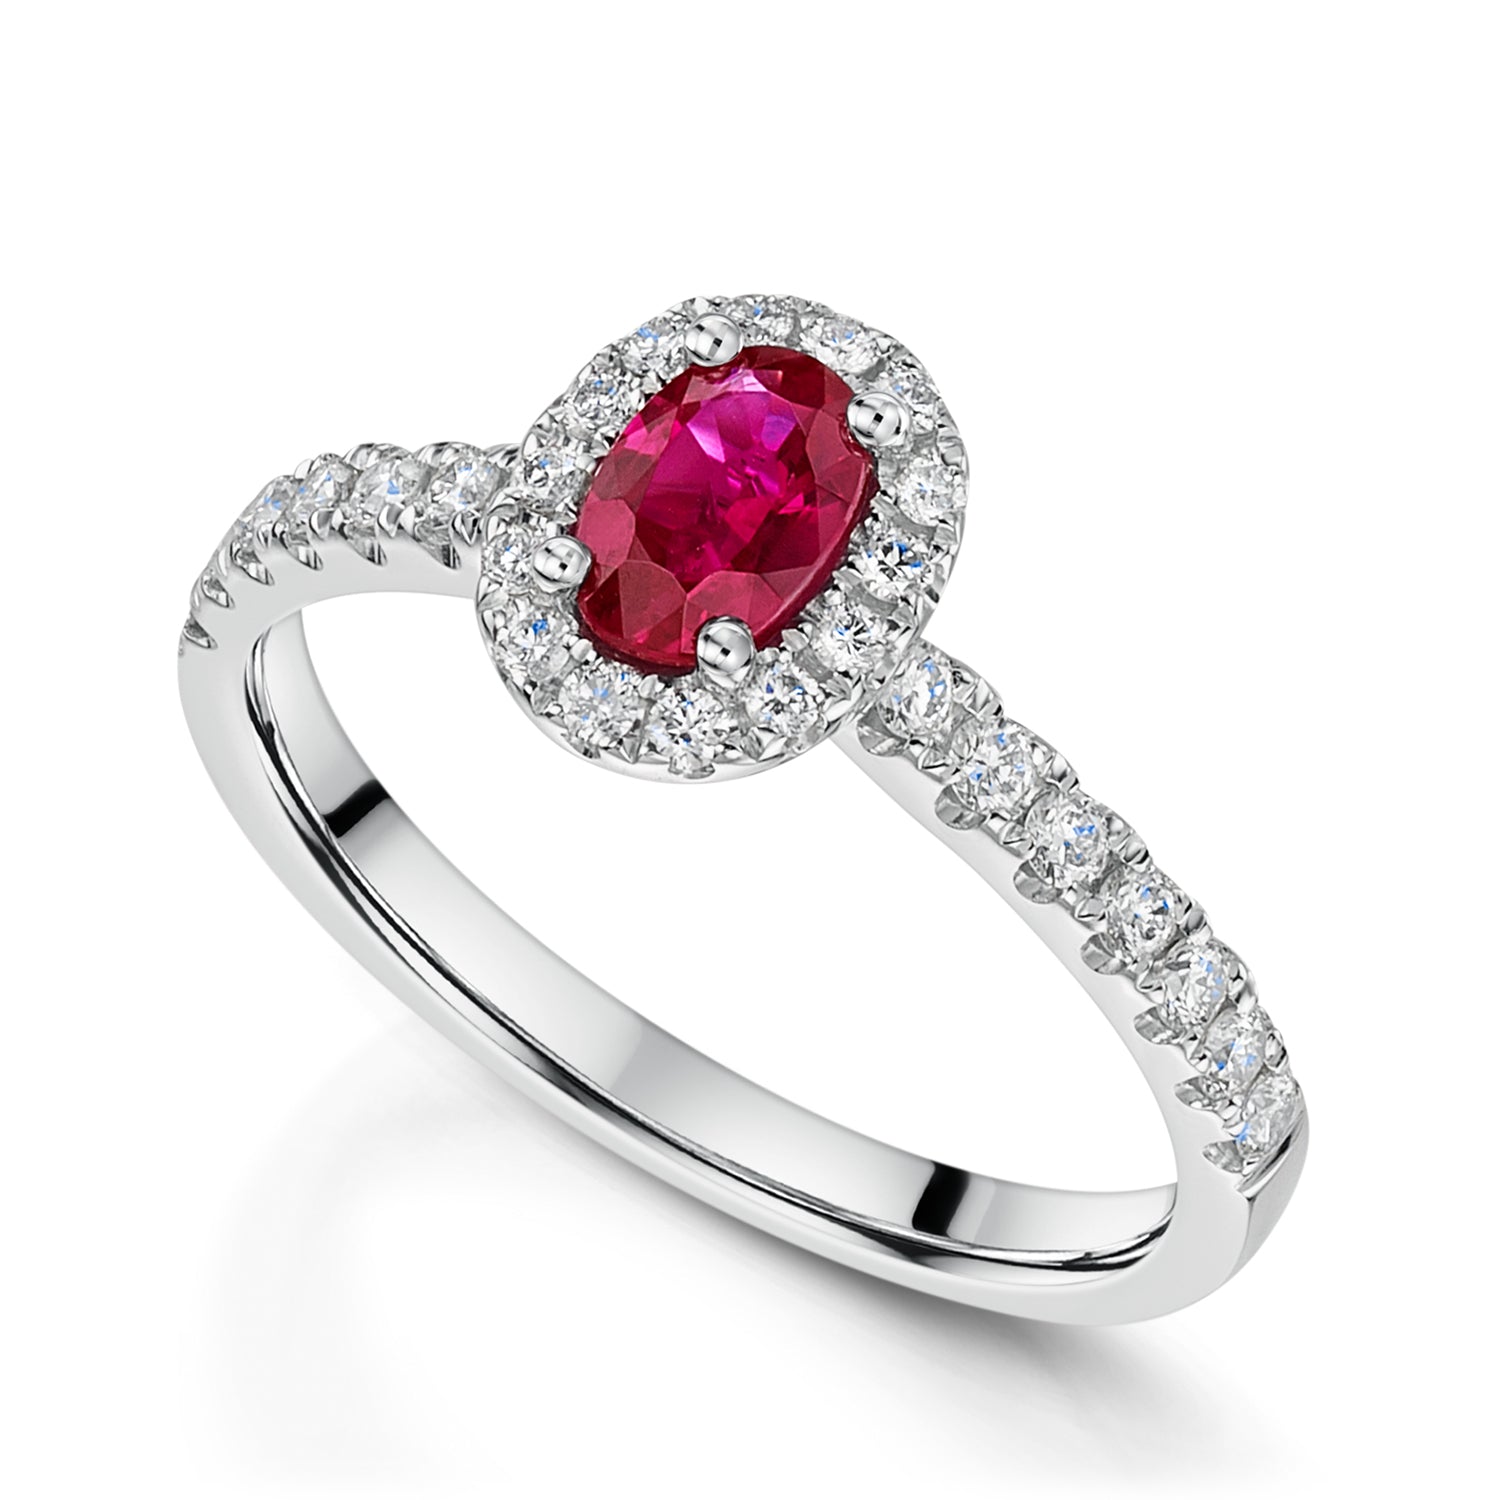 Platinum Oval Cut Ruby In a Diamond Halo Setting With Diamond Set Shoulders